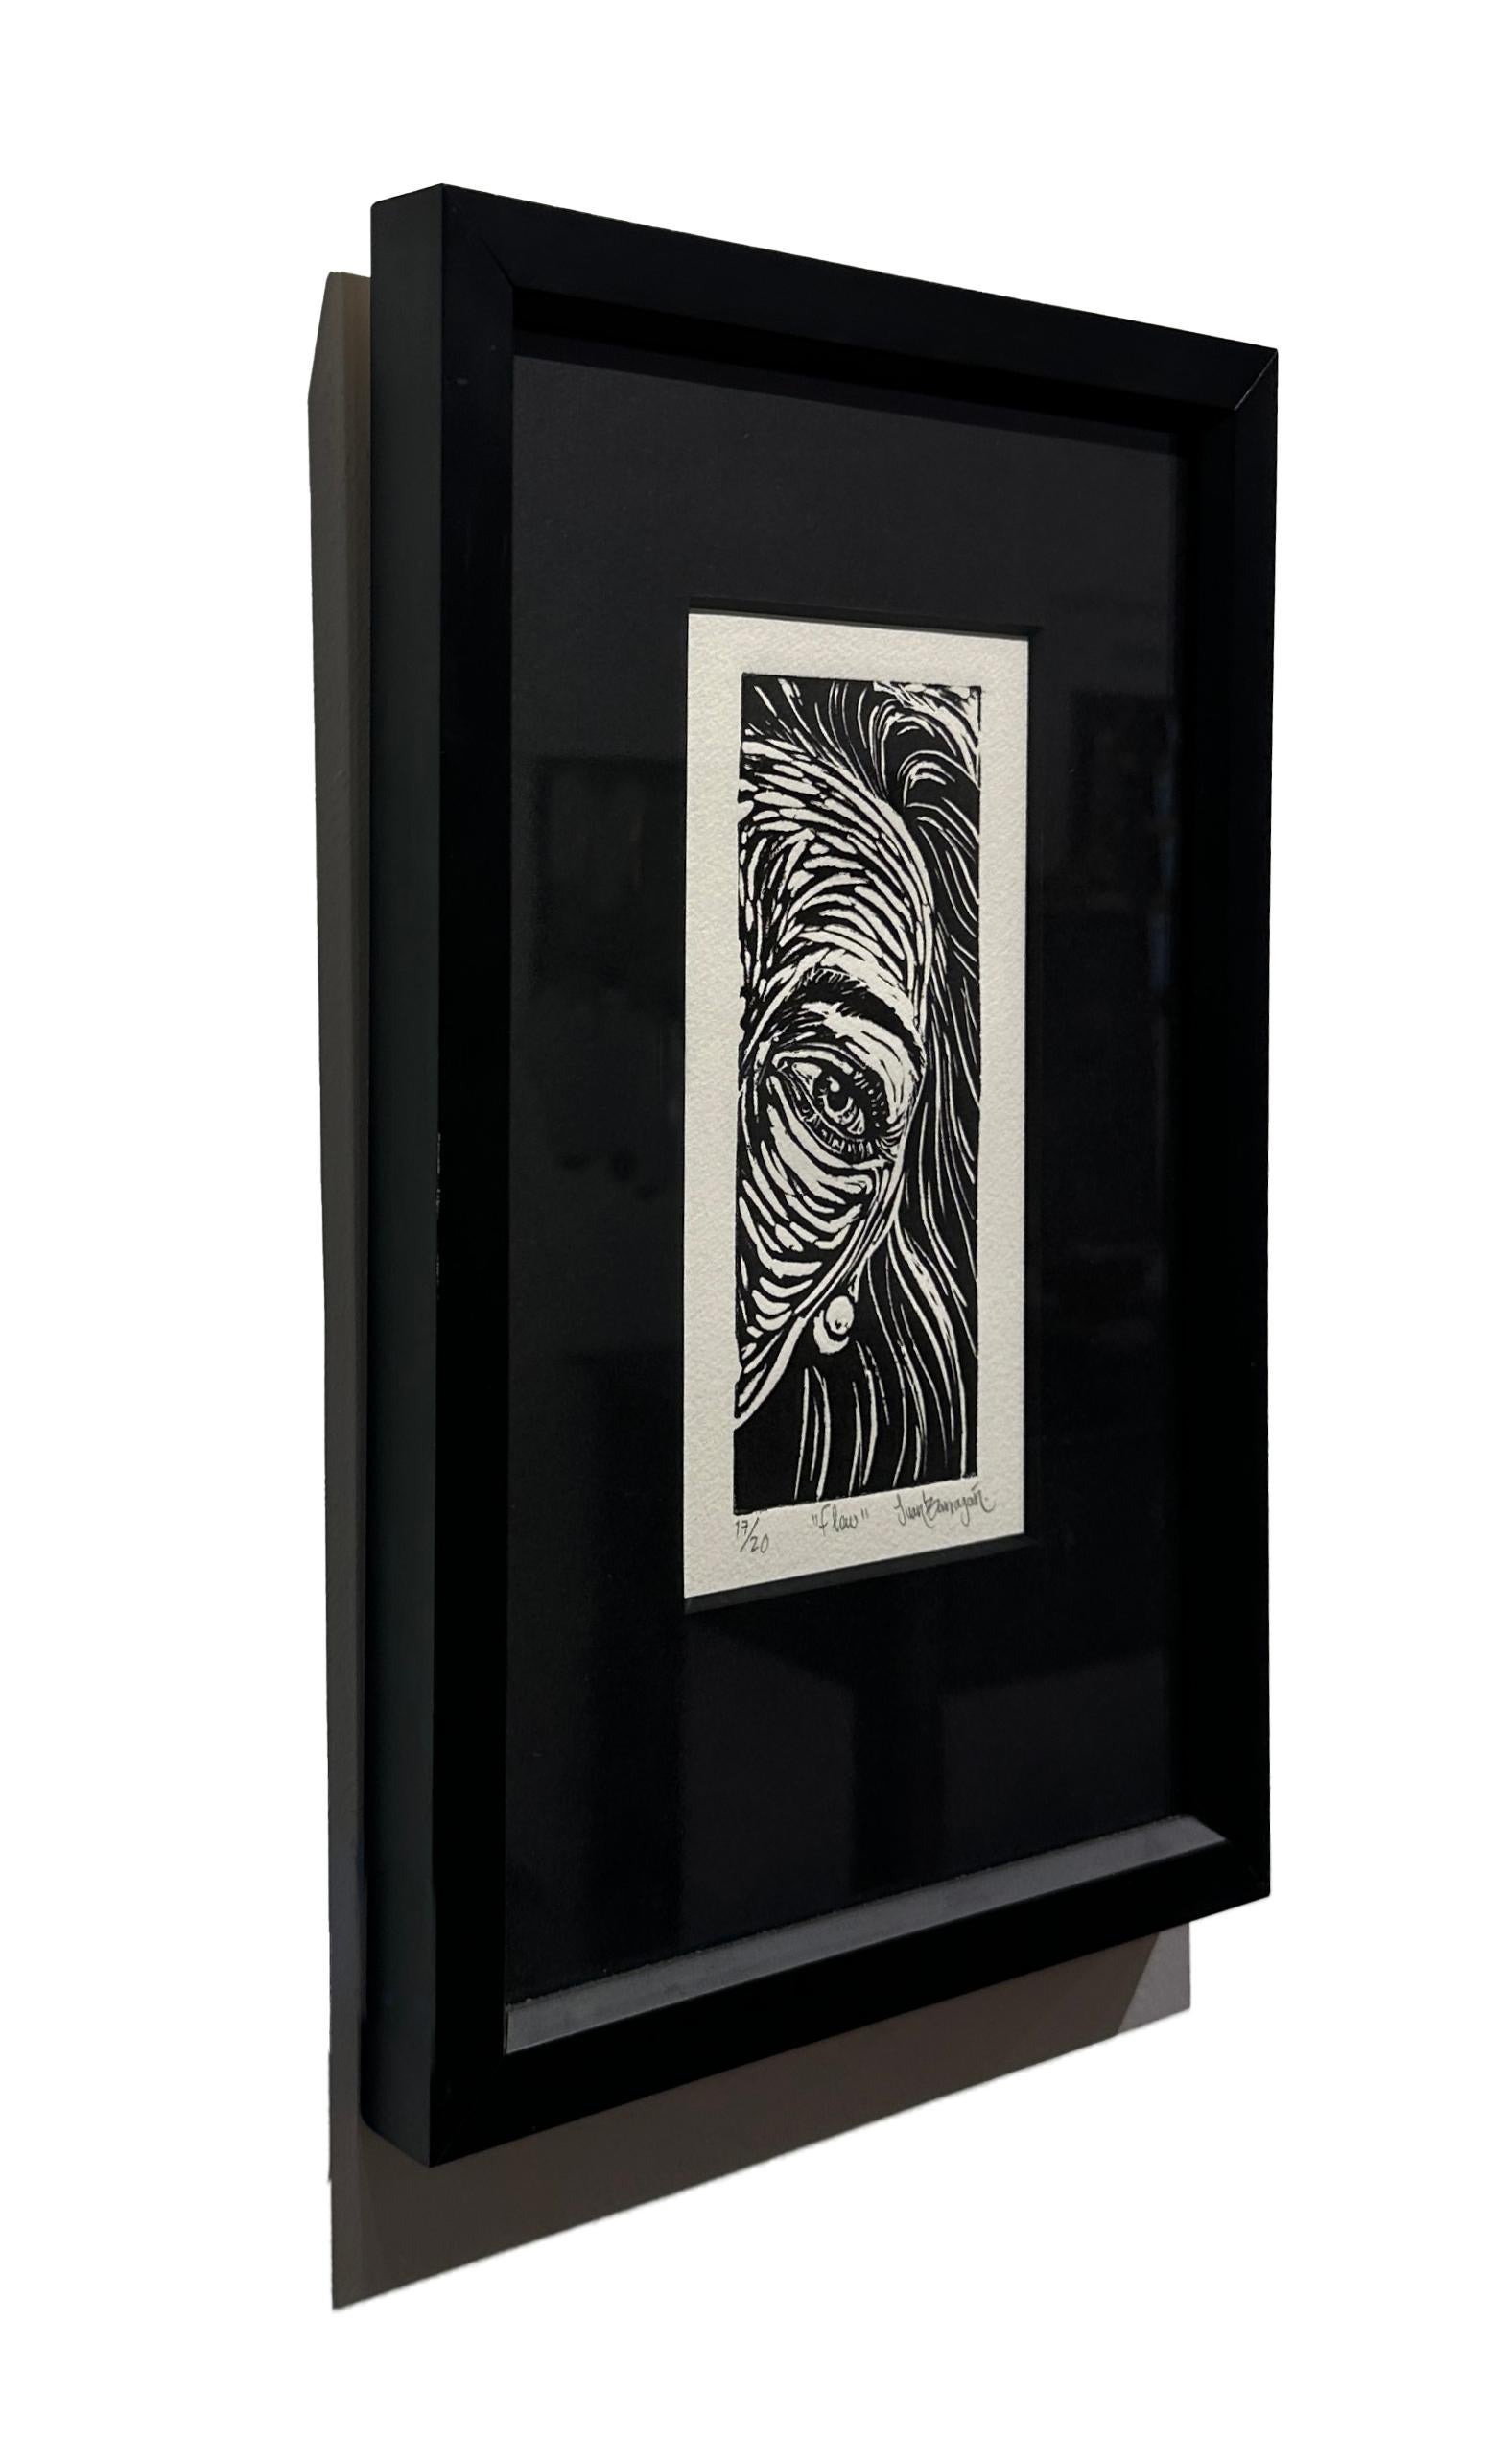 A woman tilts her head towards the viewer, one eye peaking around the edge of the frame in this small etching by Juan Barragán.  It is enhanced by the black mat and black frame.  This piece is edition 17 of a total of 20.

Juan Barragán
Flow
ink on